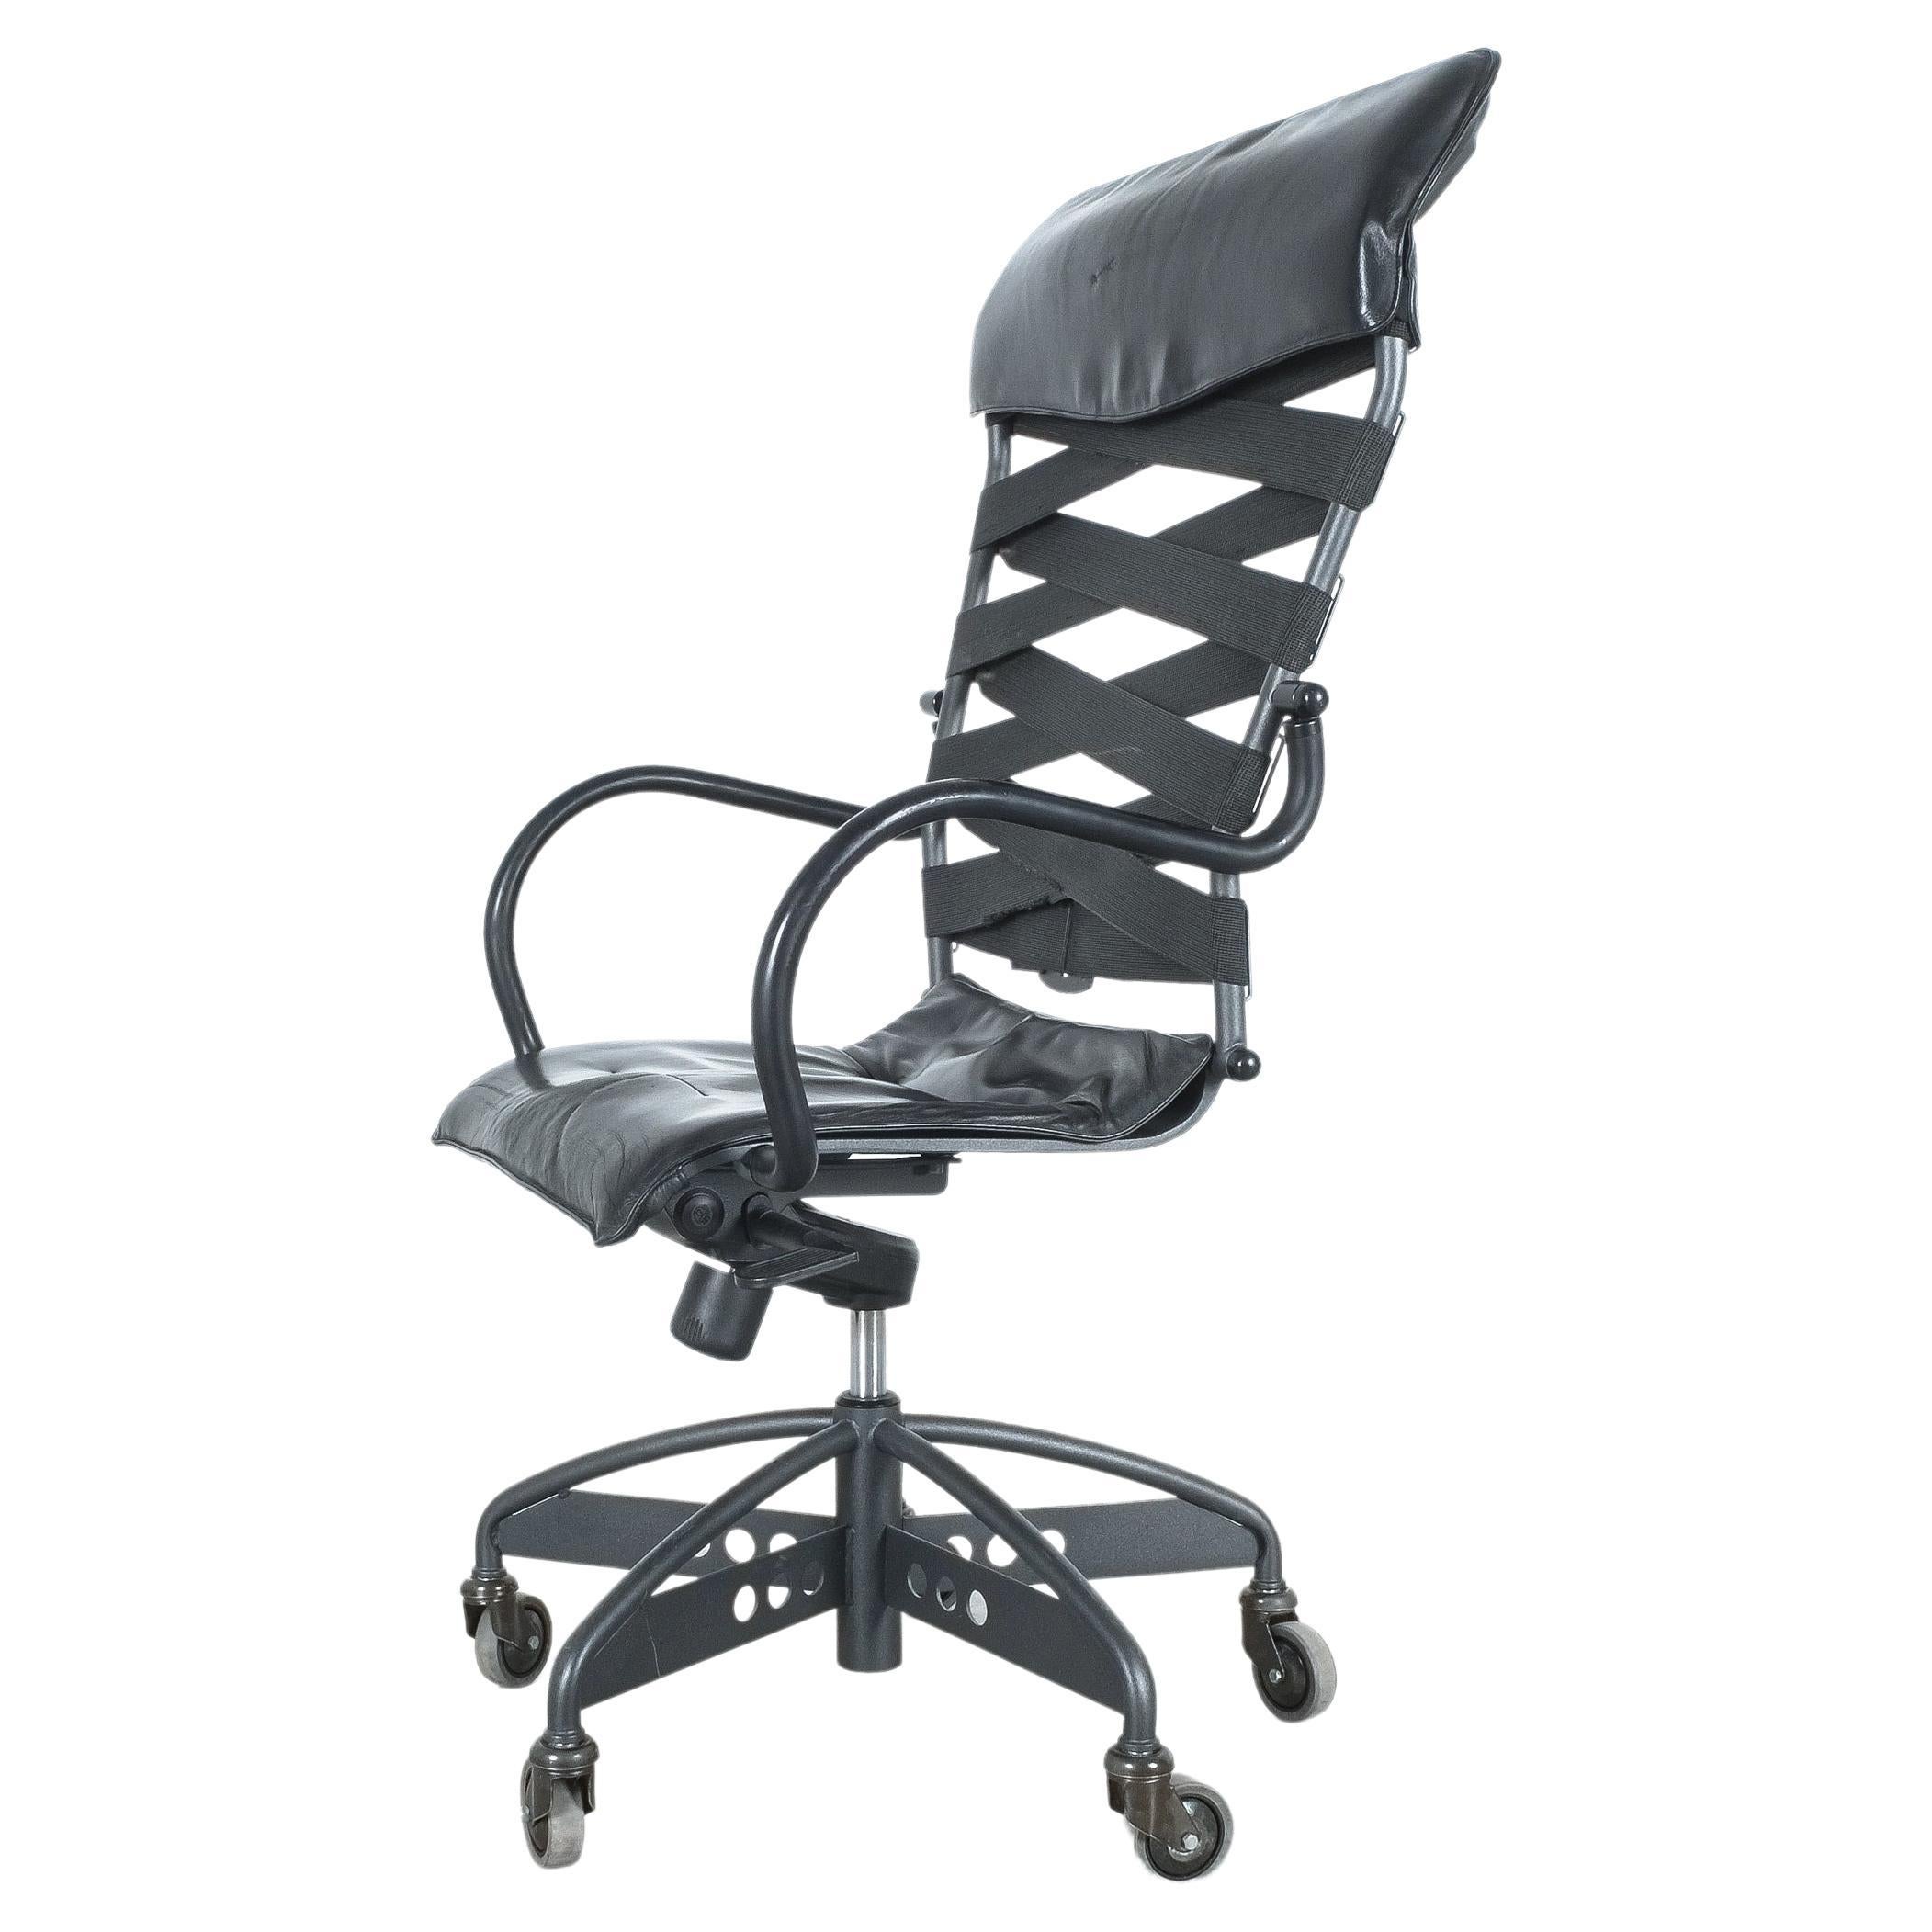 What is a high back office chair?